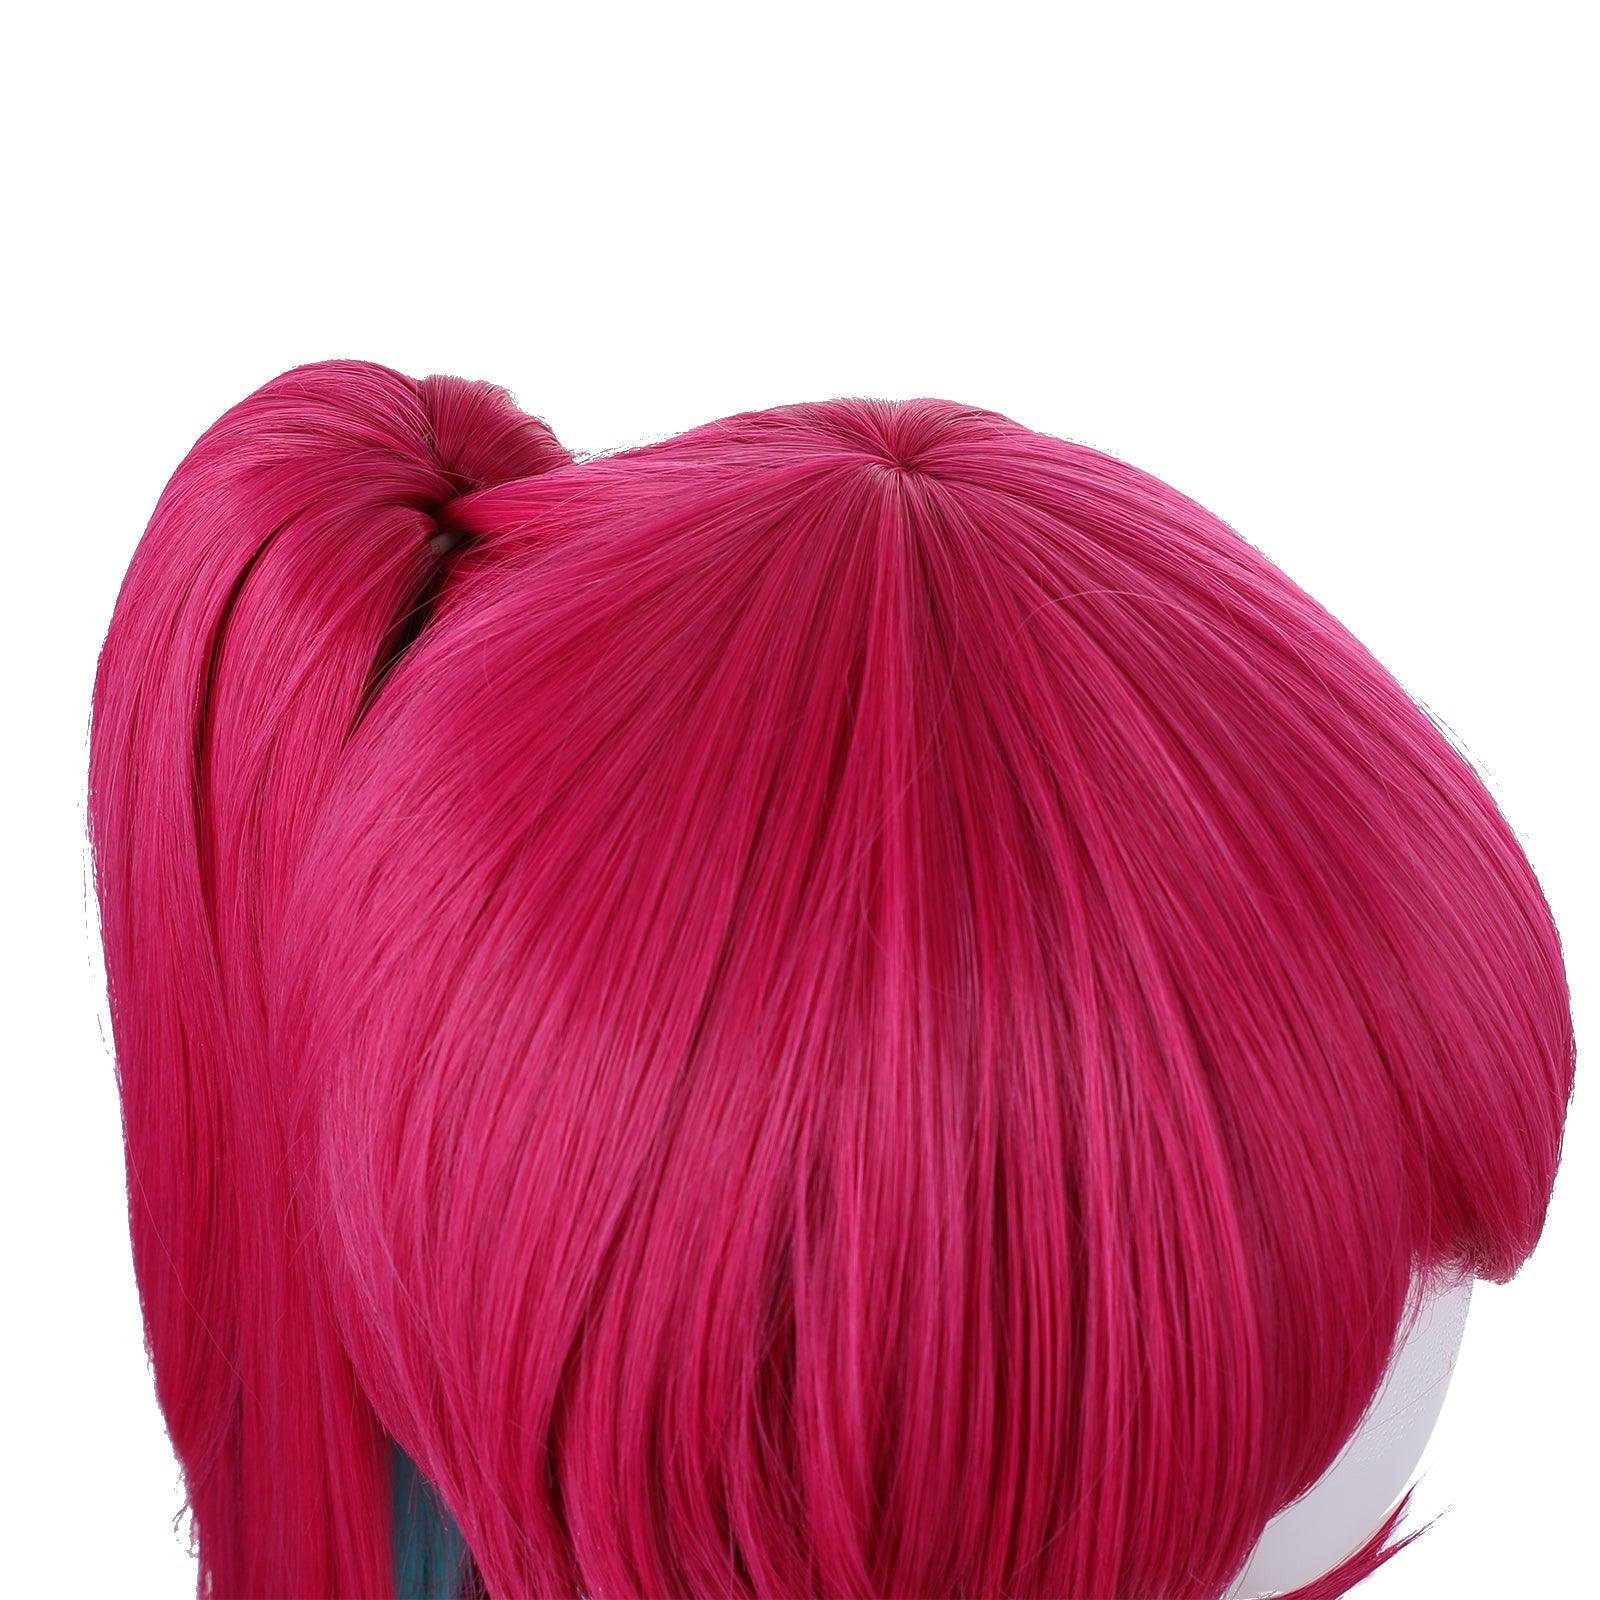 coscrew Anime Sivir Rose red to green Cosplay Wig of League of Legends/LOL 530B - coscrew